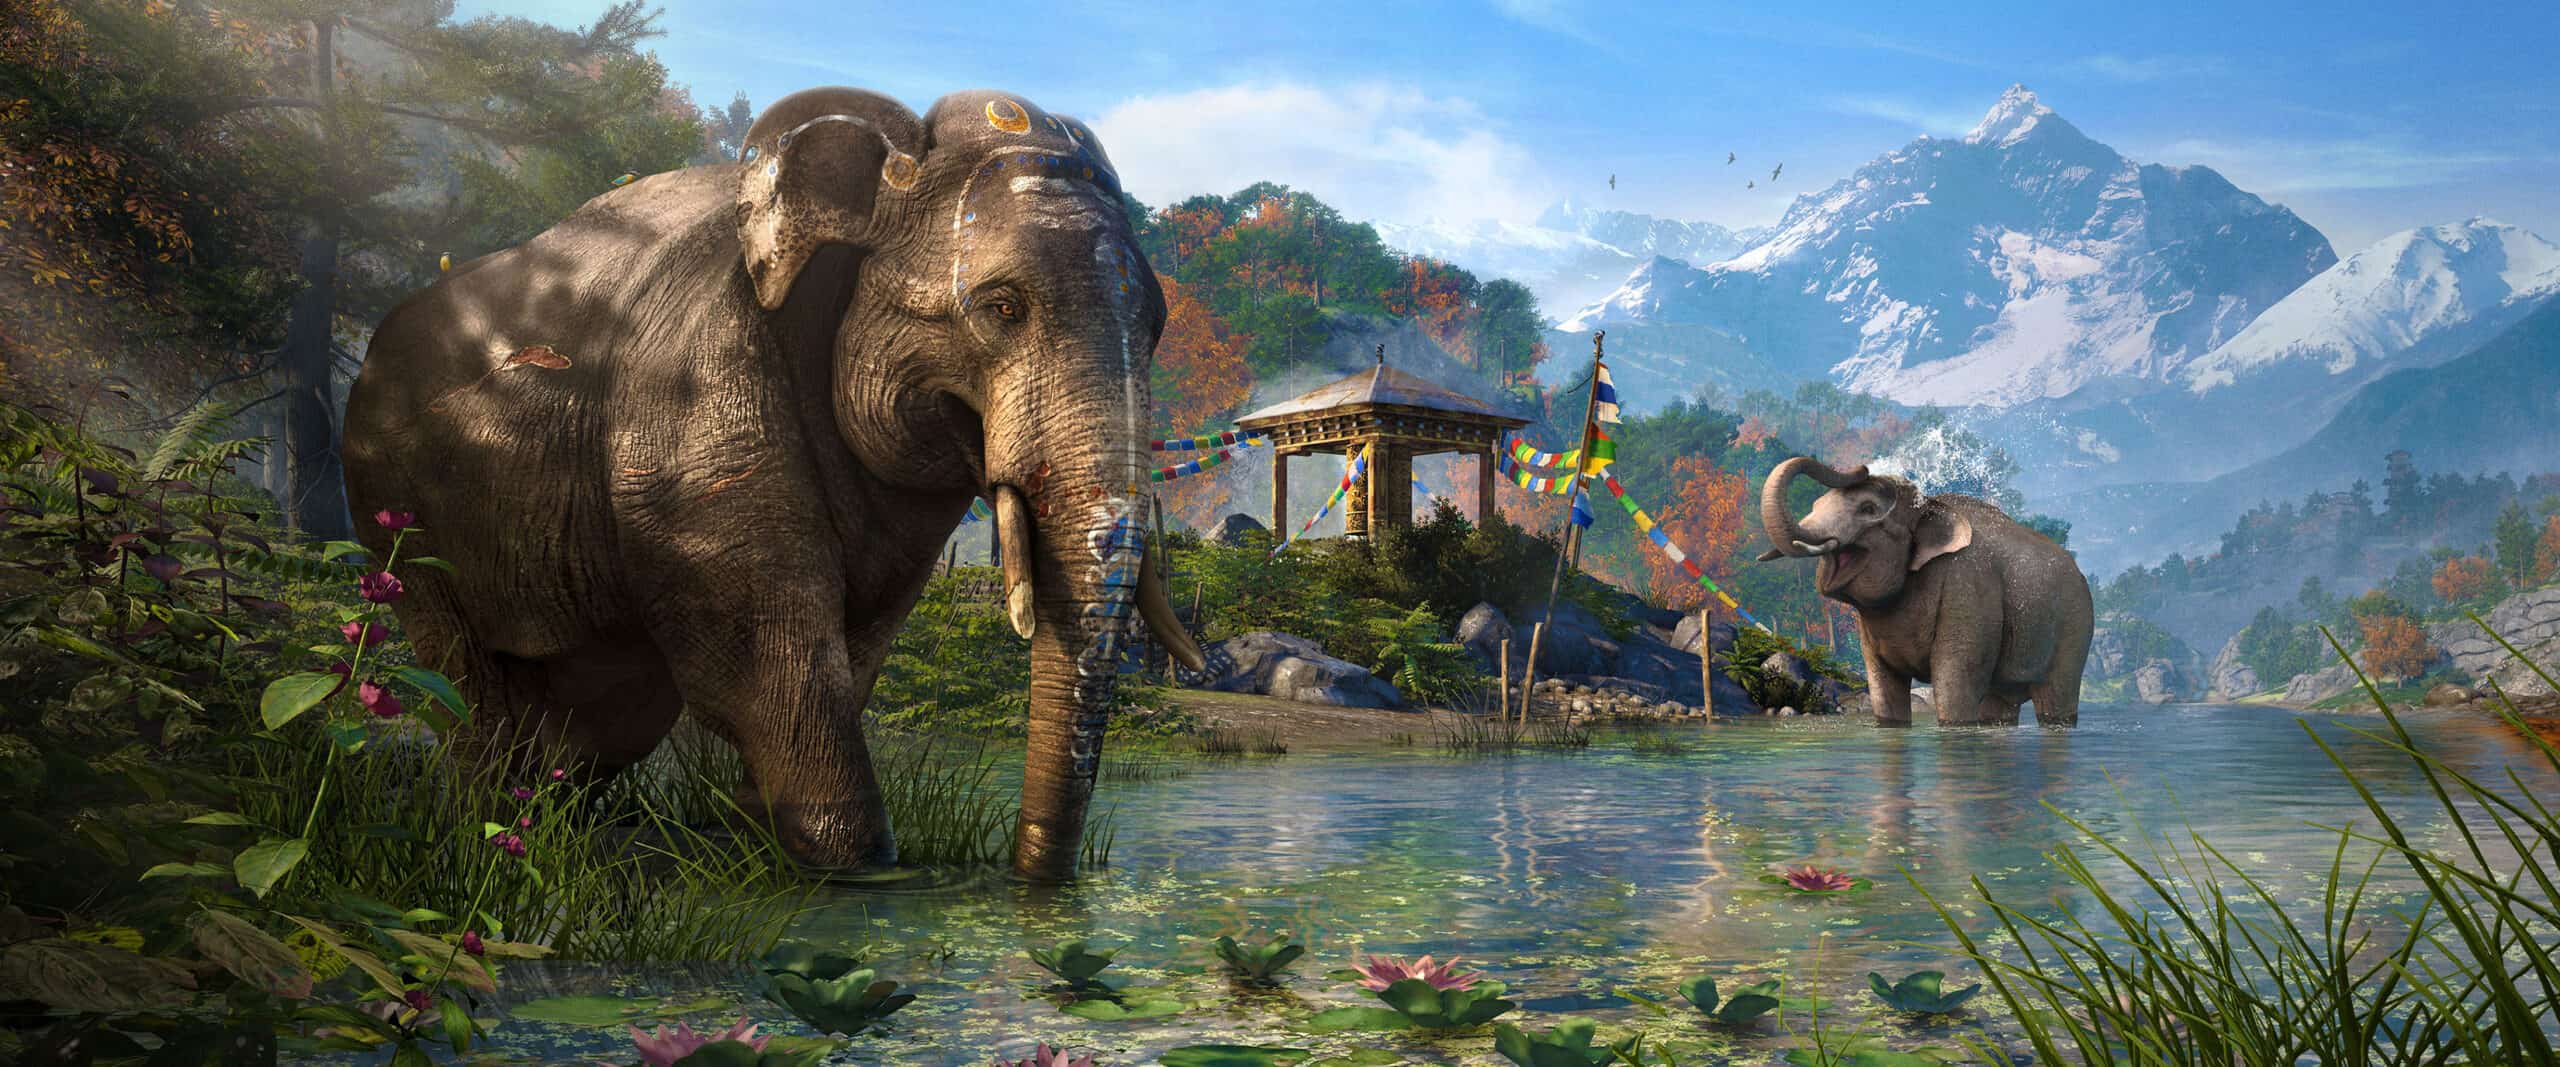 Screencapture from Far Cry 4 gameplay